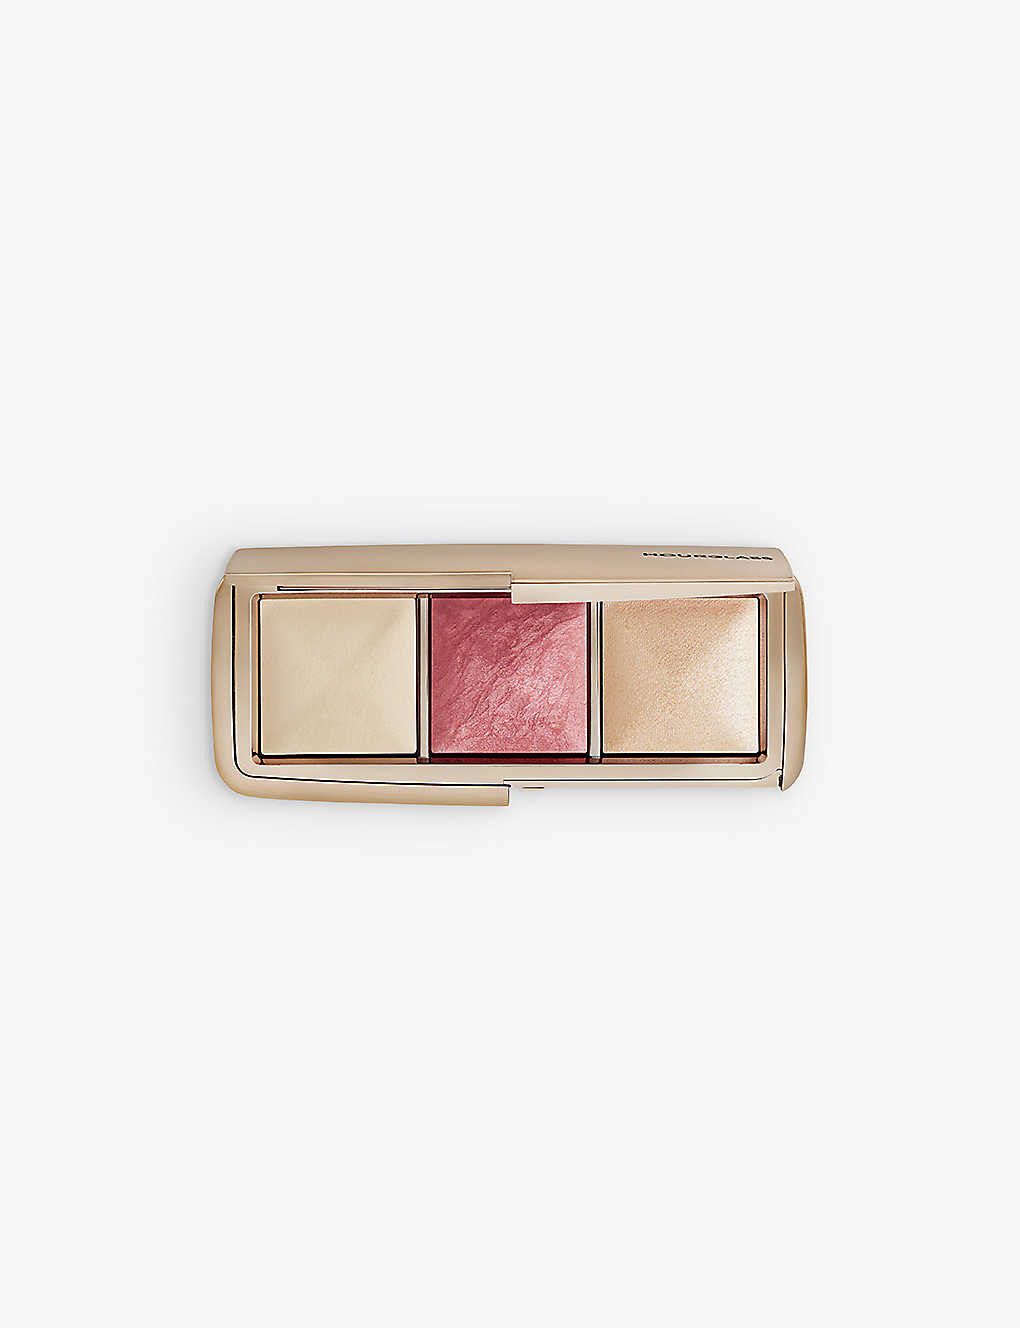 Hourglass Diffused Rose Ambient Lighting Limited-edition Palette 10g